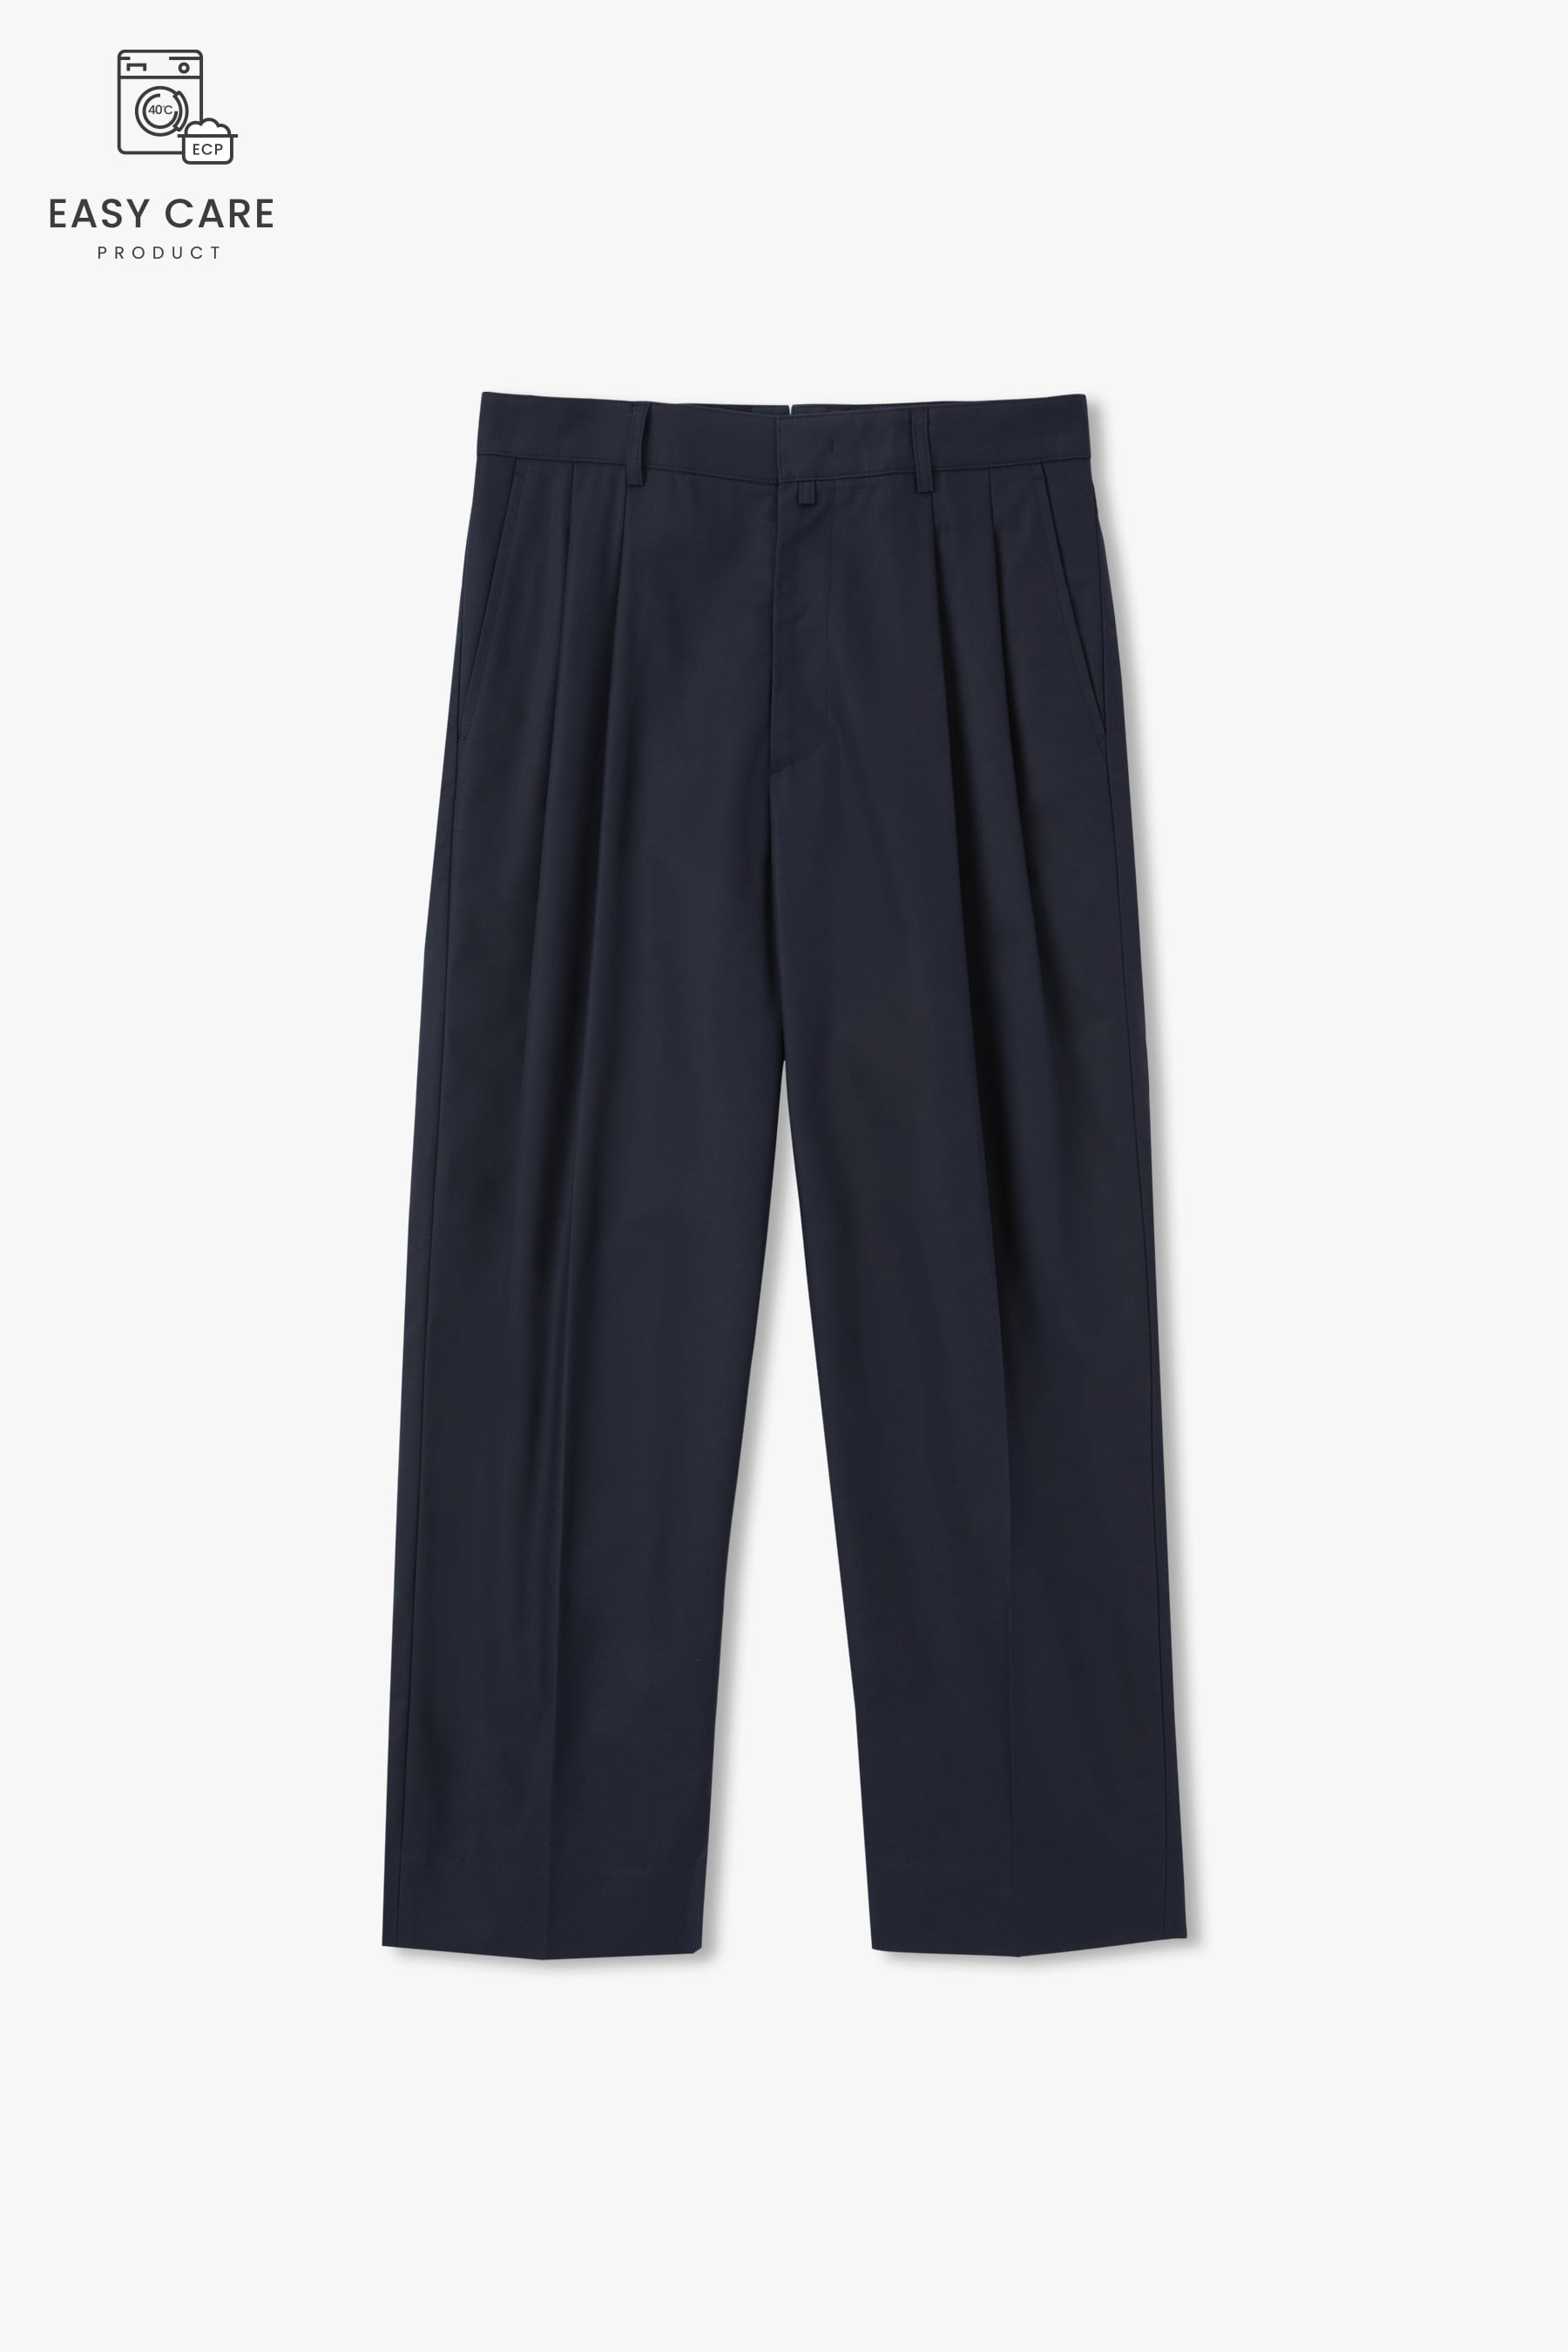 DARK NAVY R-802 TWO TUCK TAPERED COTTON DRILL CHINO PANTS (ECP GARMENT PROCESS ONLY MACHINE)